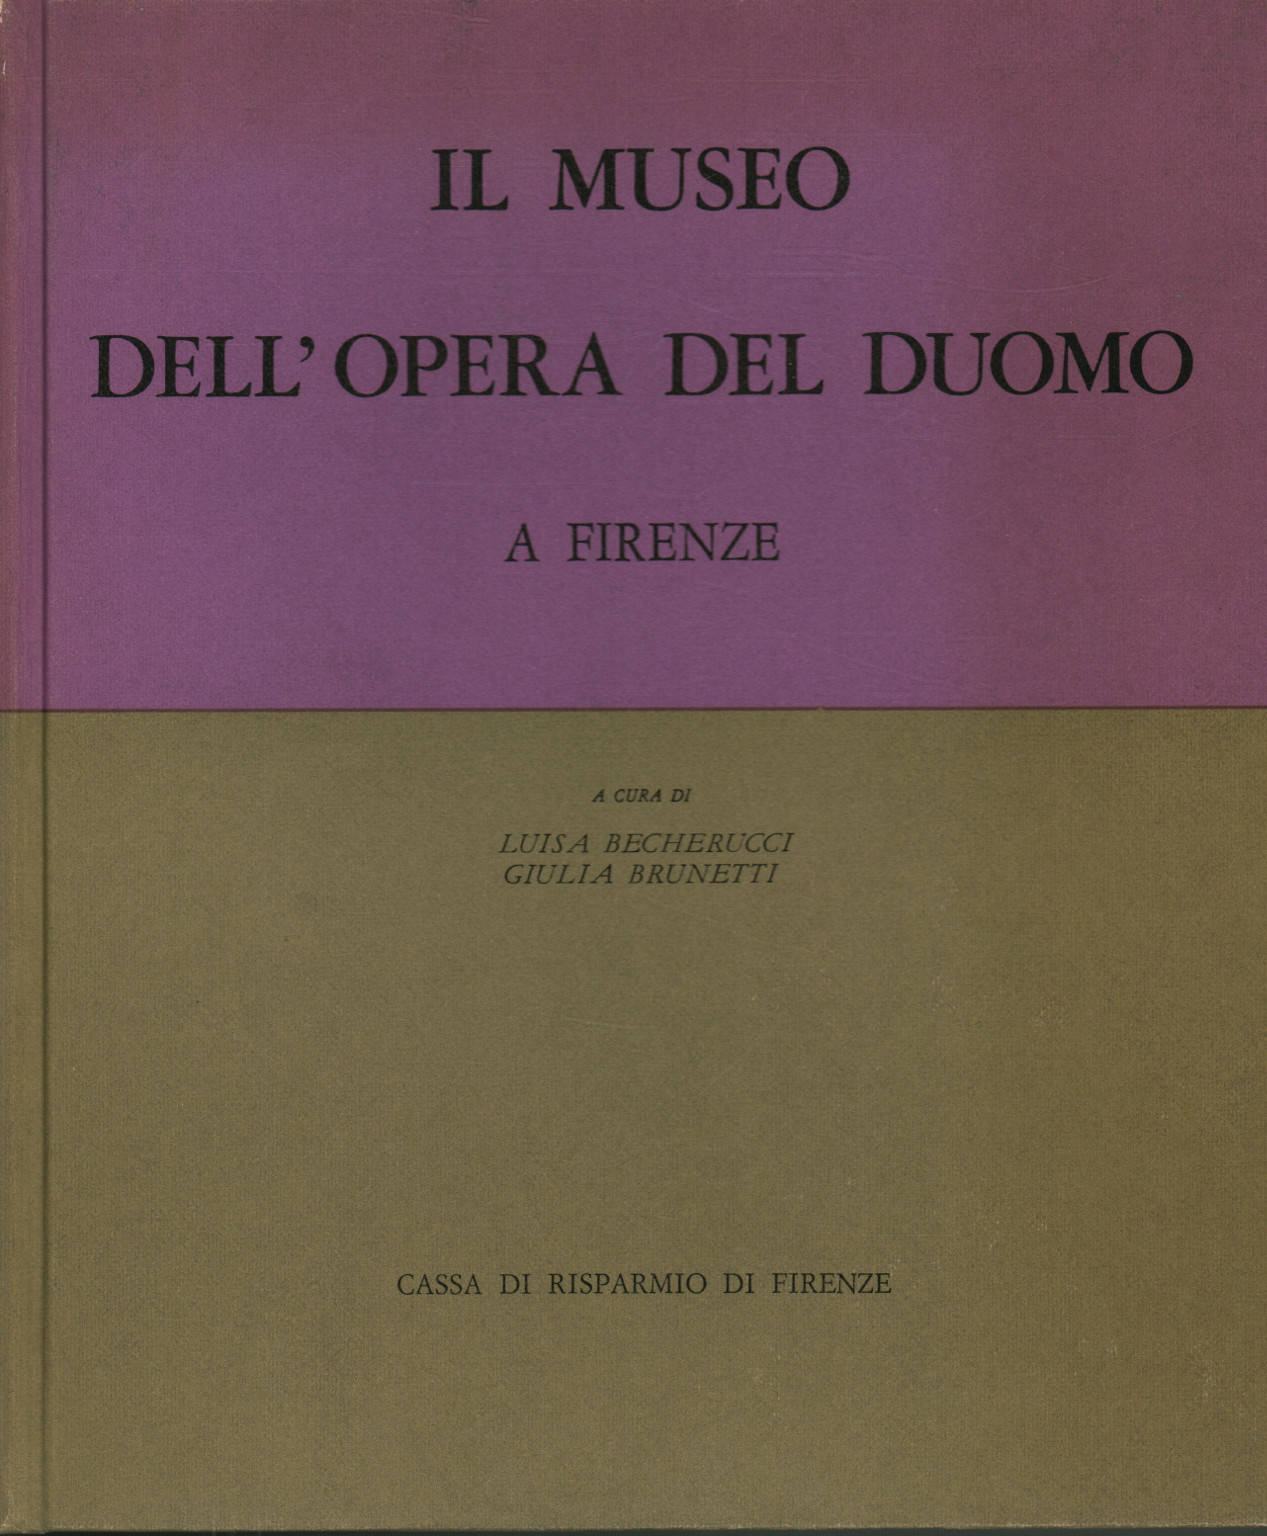 The Museo dell'opera del Duomo in Florence. Volume if, s.a.